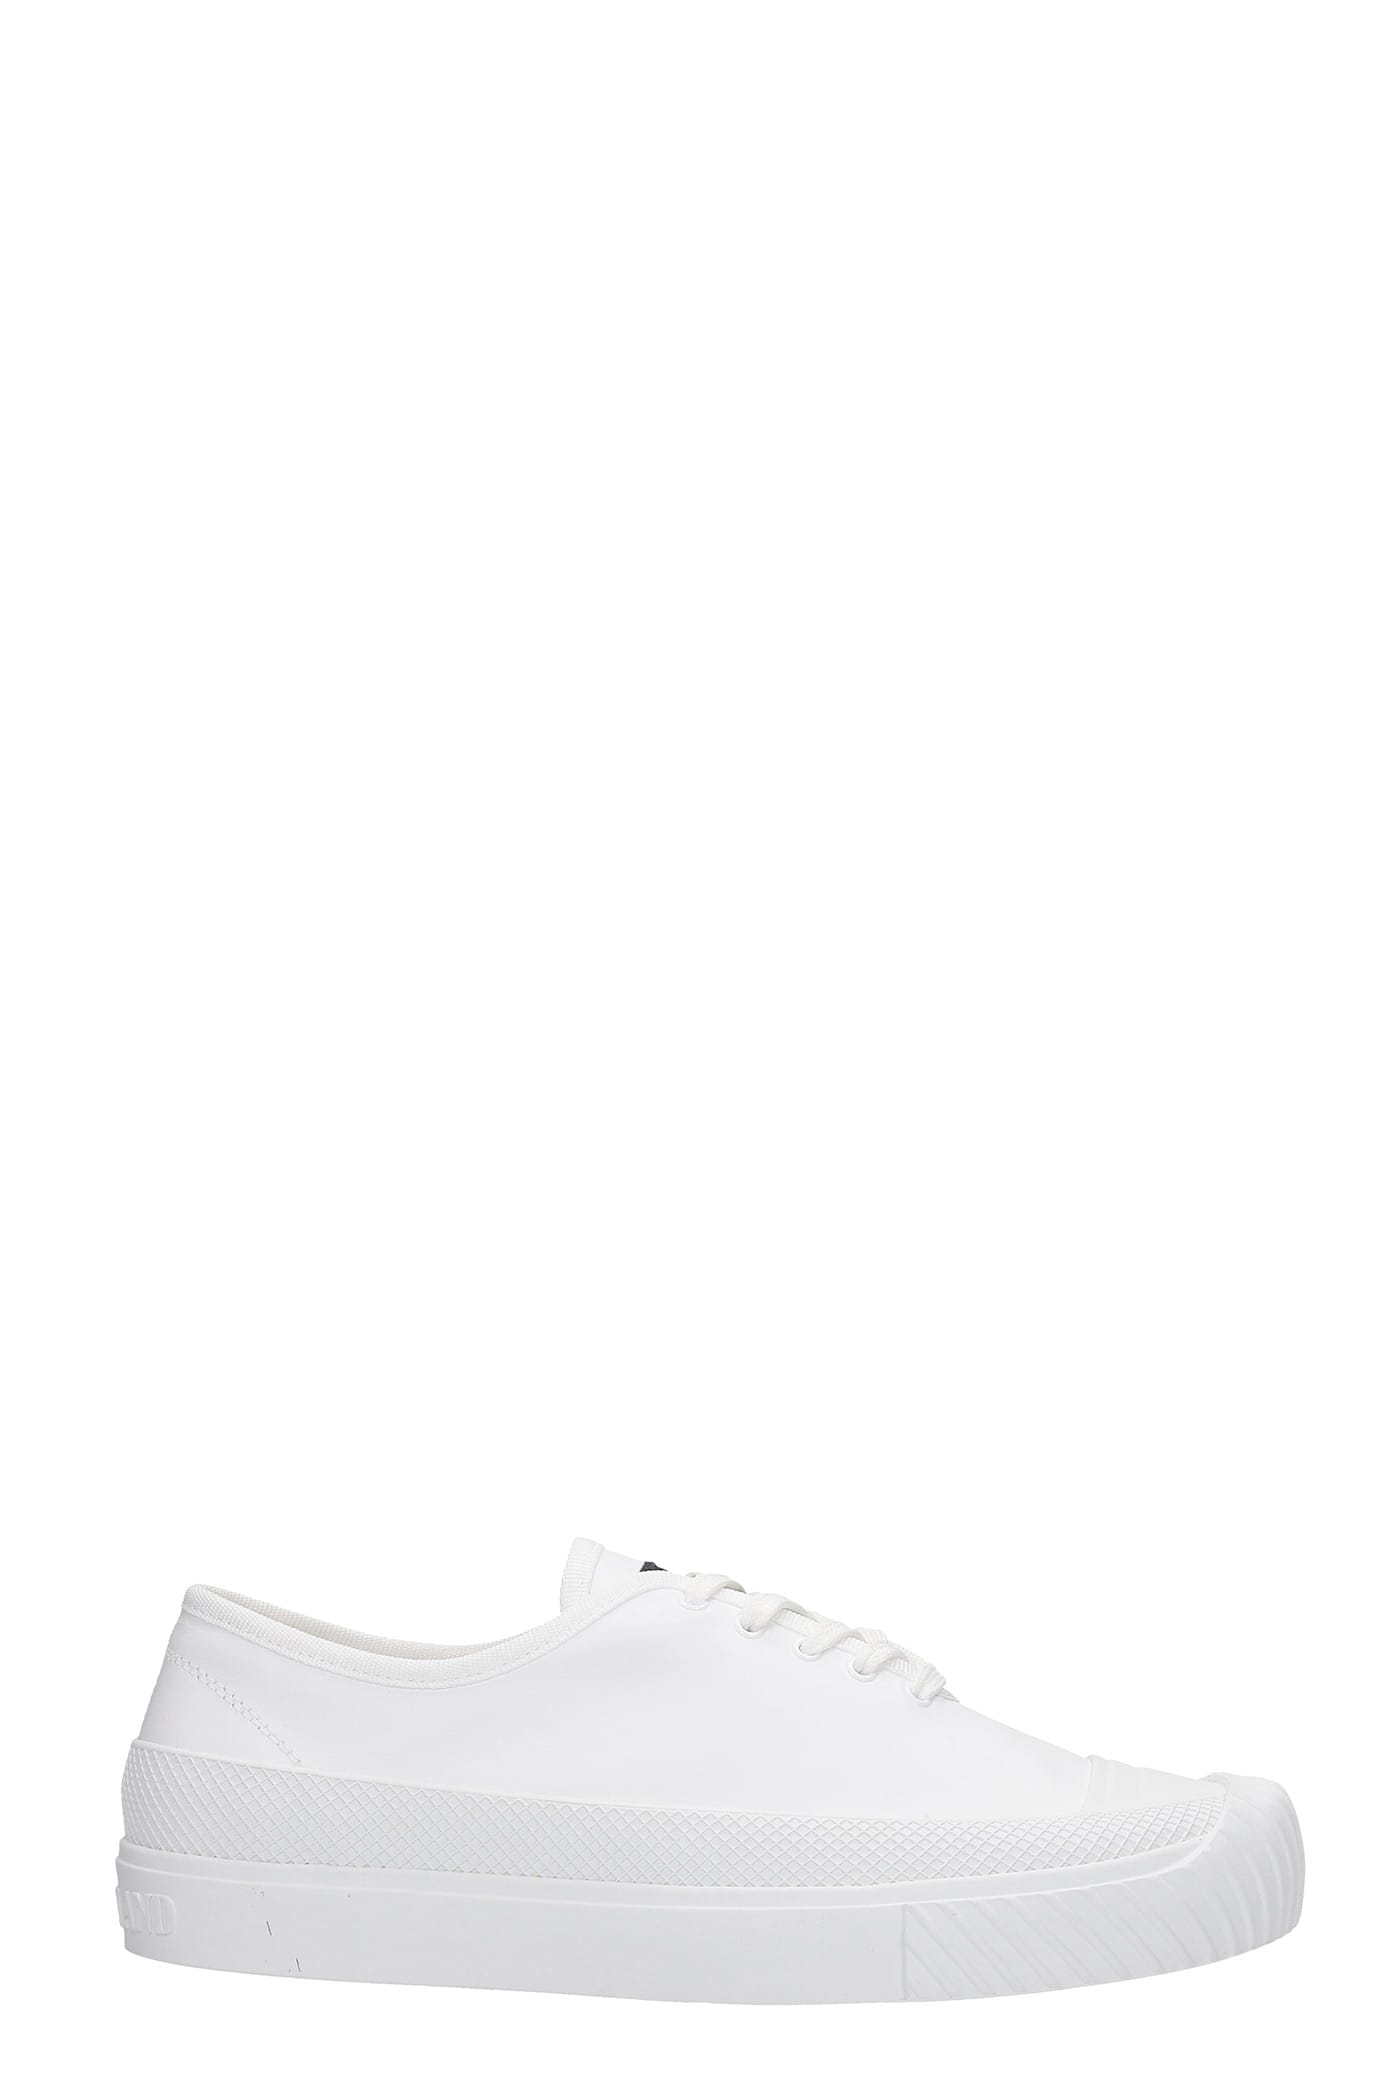 Stone Island Sneakers In White Rubber/plasic